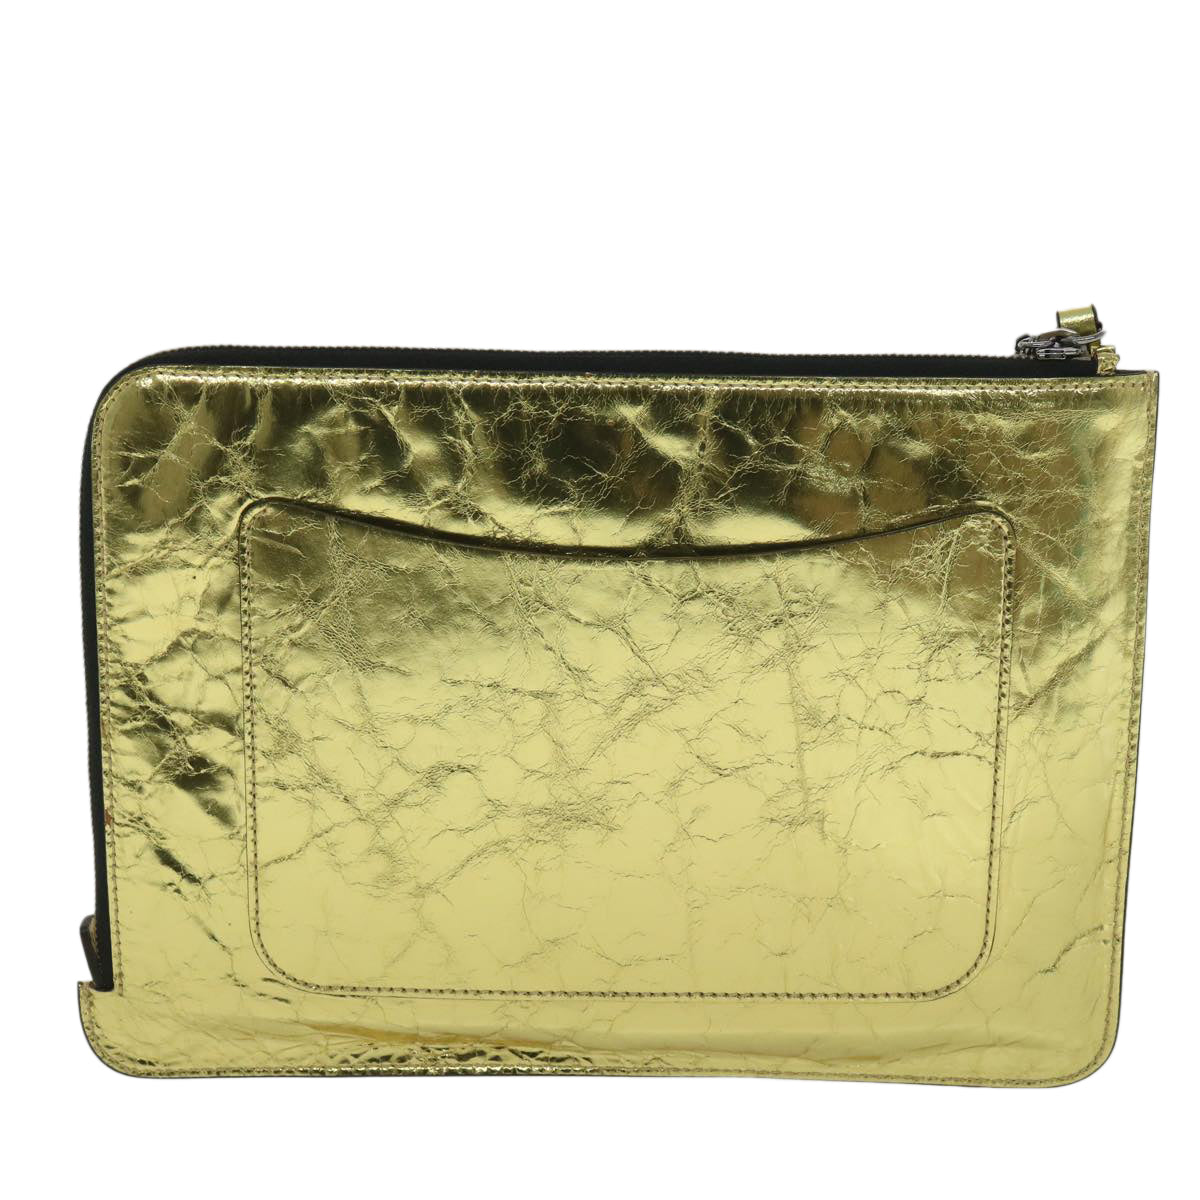 CHANEL Clutch Bag Metallic Leather Gold A82164 CC Auth 38172